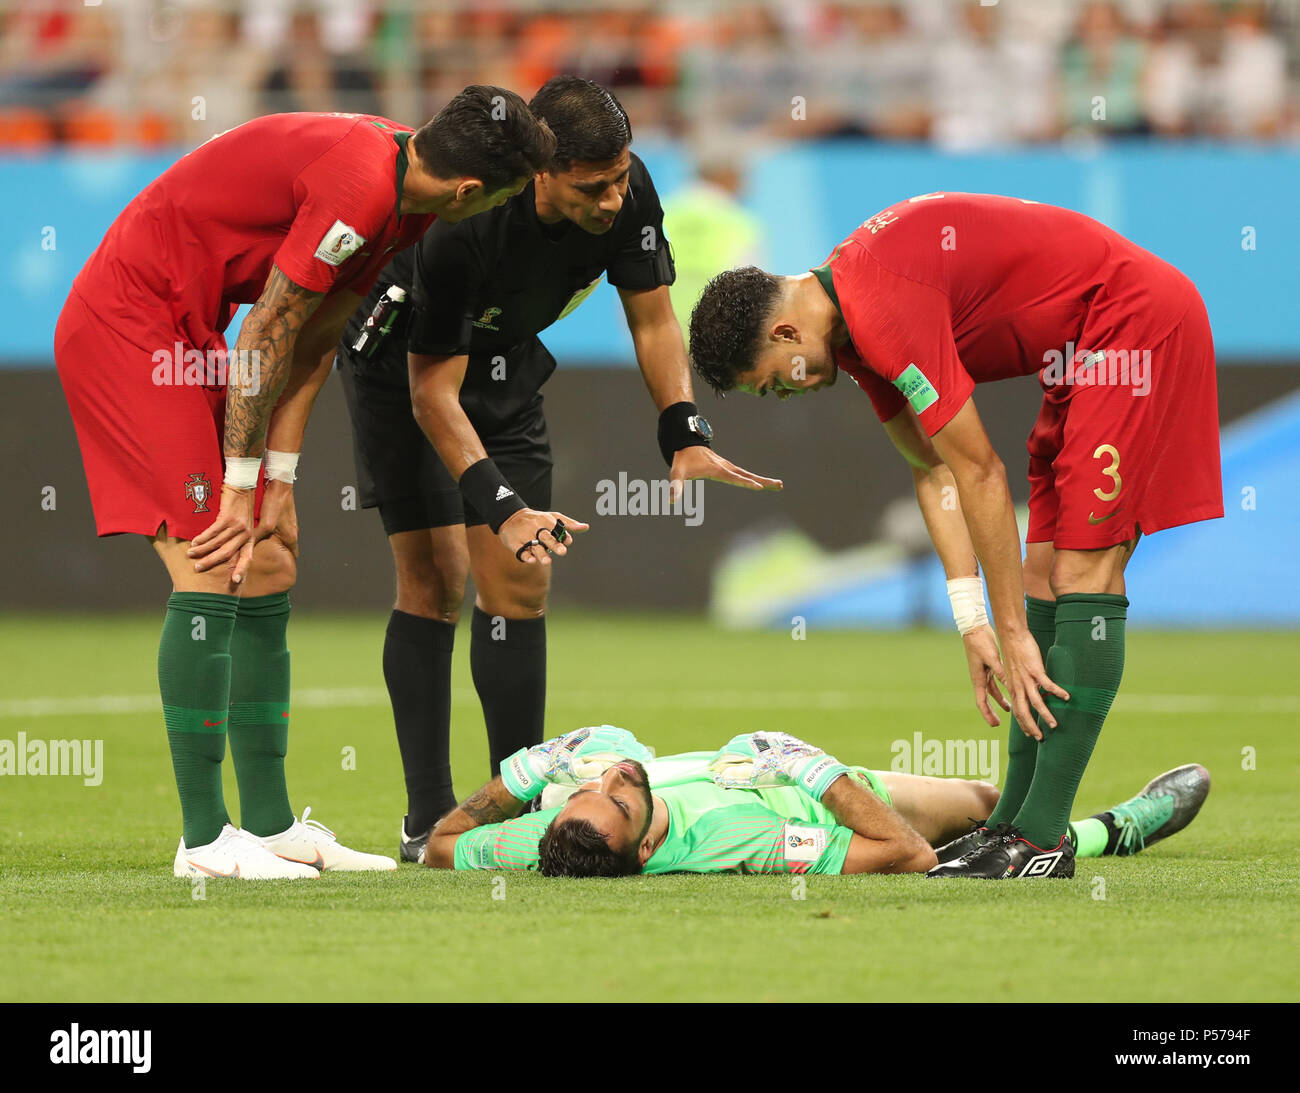 Saransk, Russia. 25th June, 2018. The referee talks to Portugal's goalkeeper Rui Patricio (bottom) during the 2018 FIFA World Cup Group B match between Iran and Portugal in Saransk, Russia, June 25, 2018. Credit: Fei Maohua/Xinhua/Alamy Live News Stock Photo